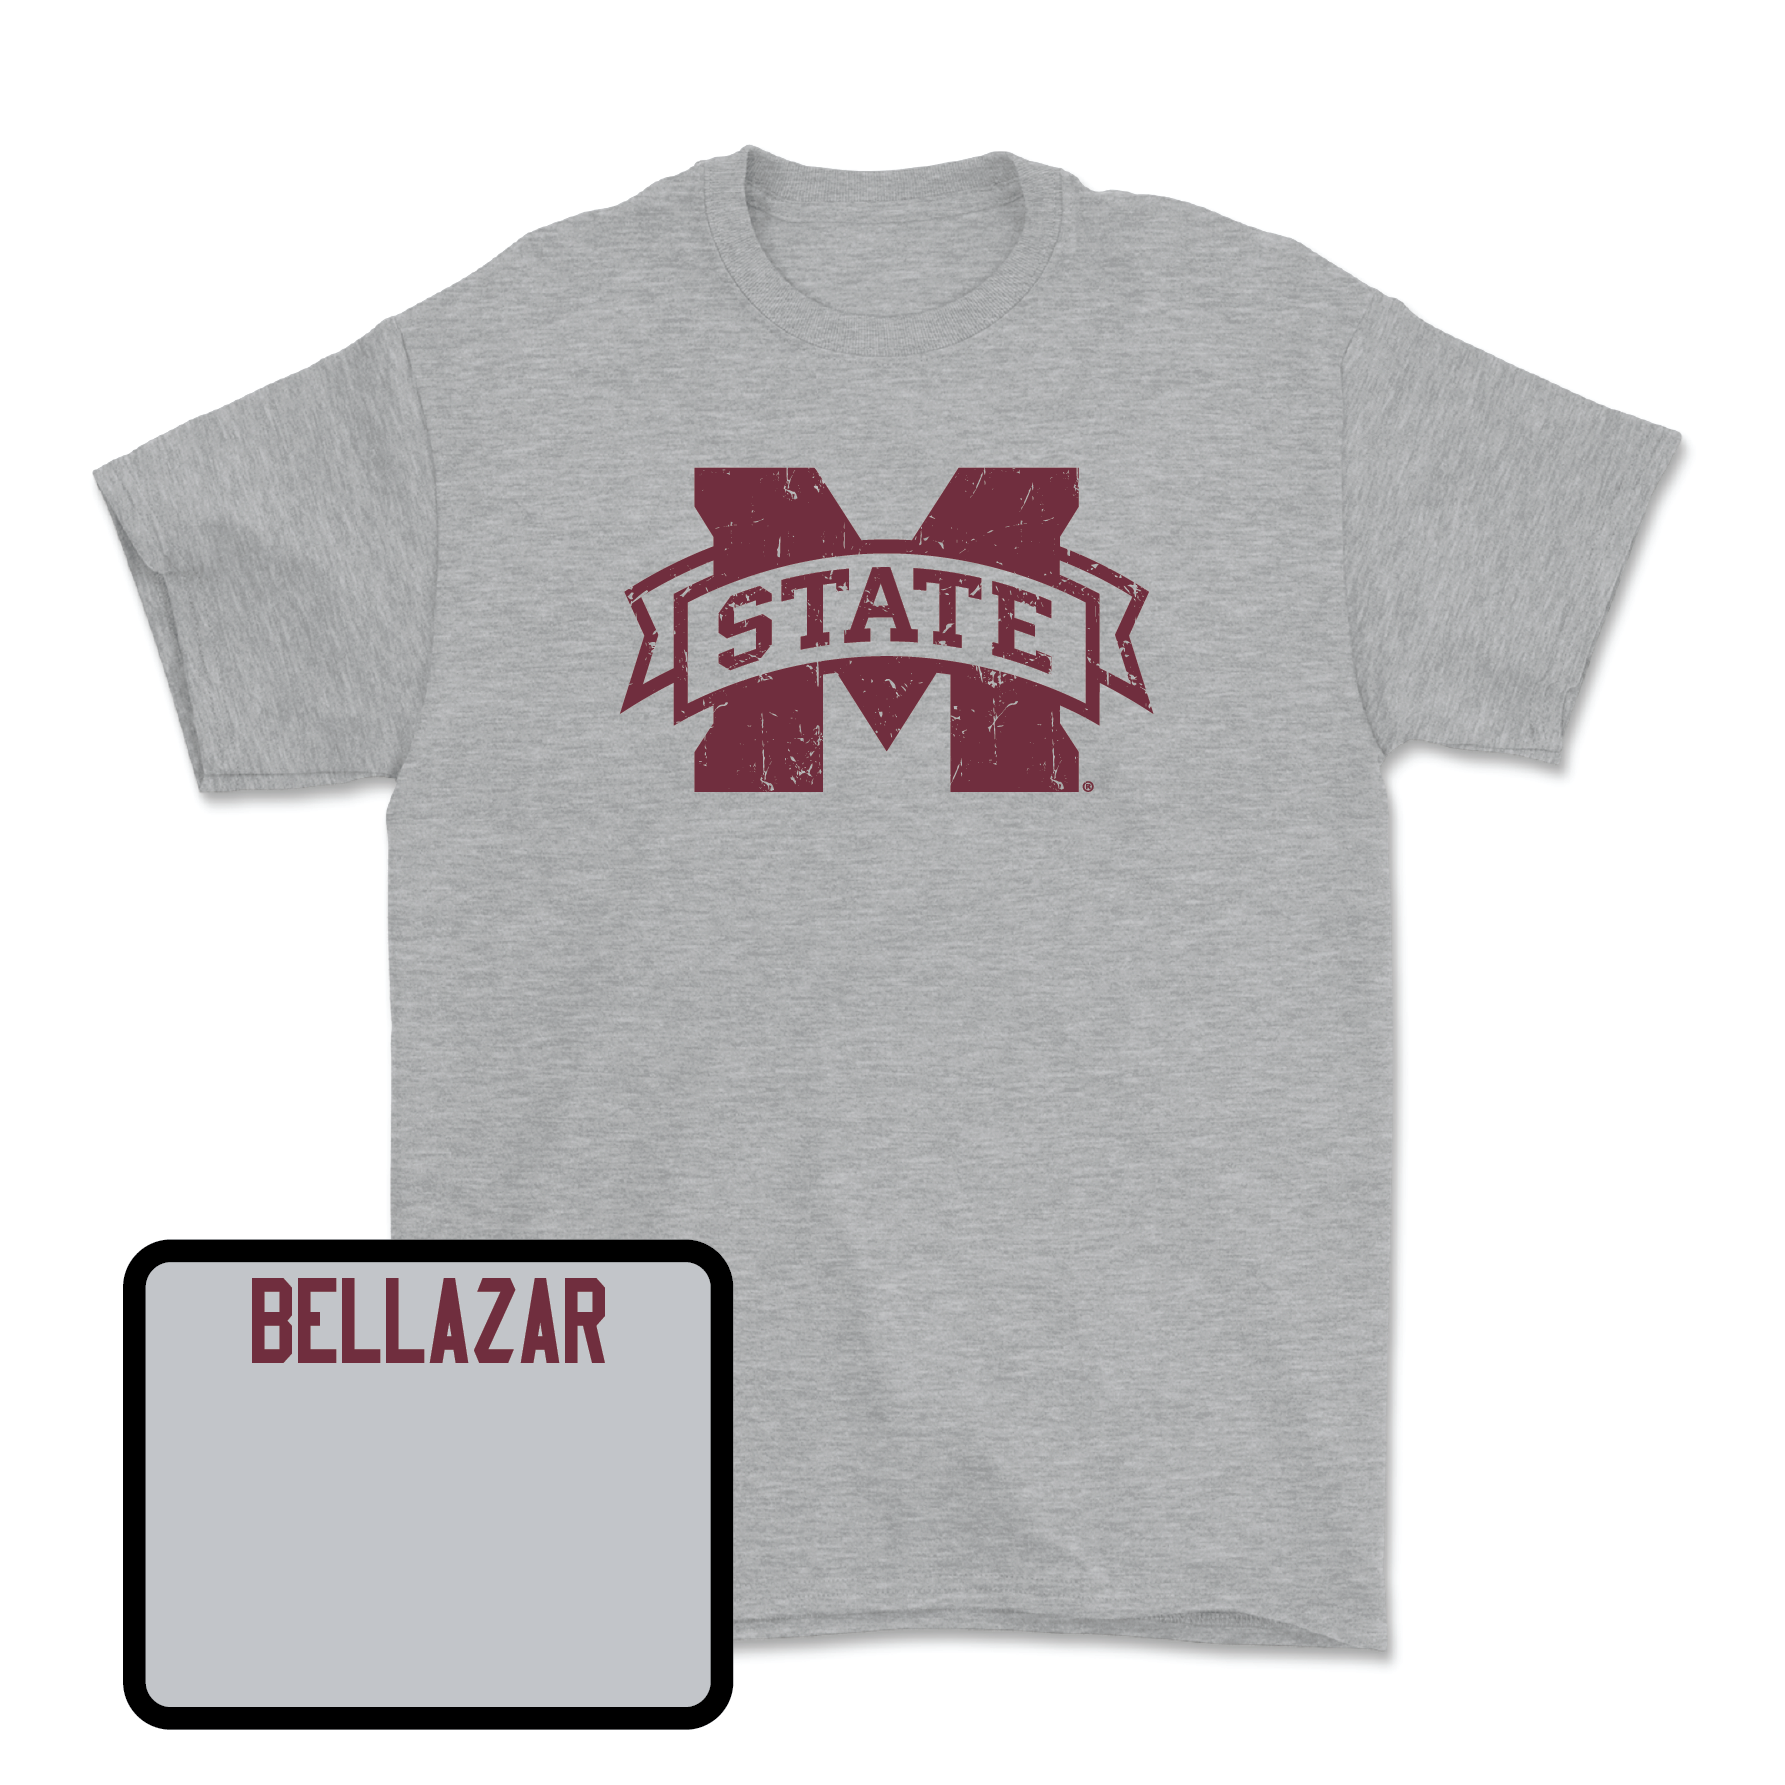 Sport Grey Football Classic Tee Youth Small / Jacoby Bellazar | #